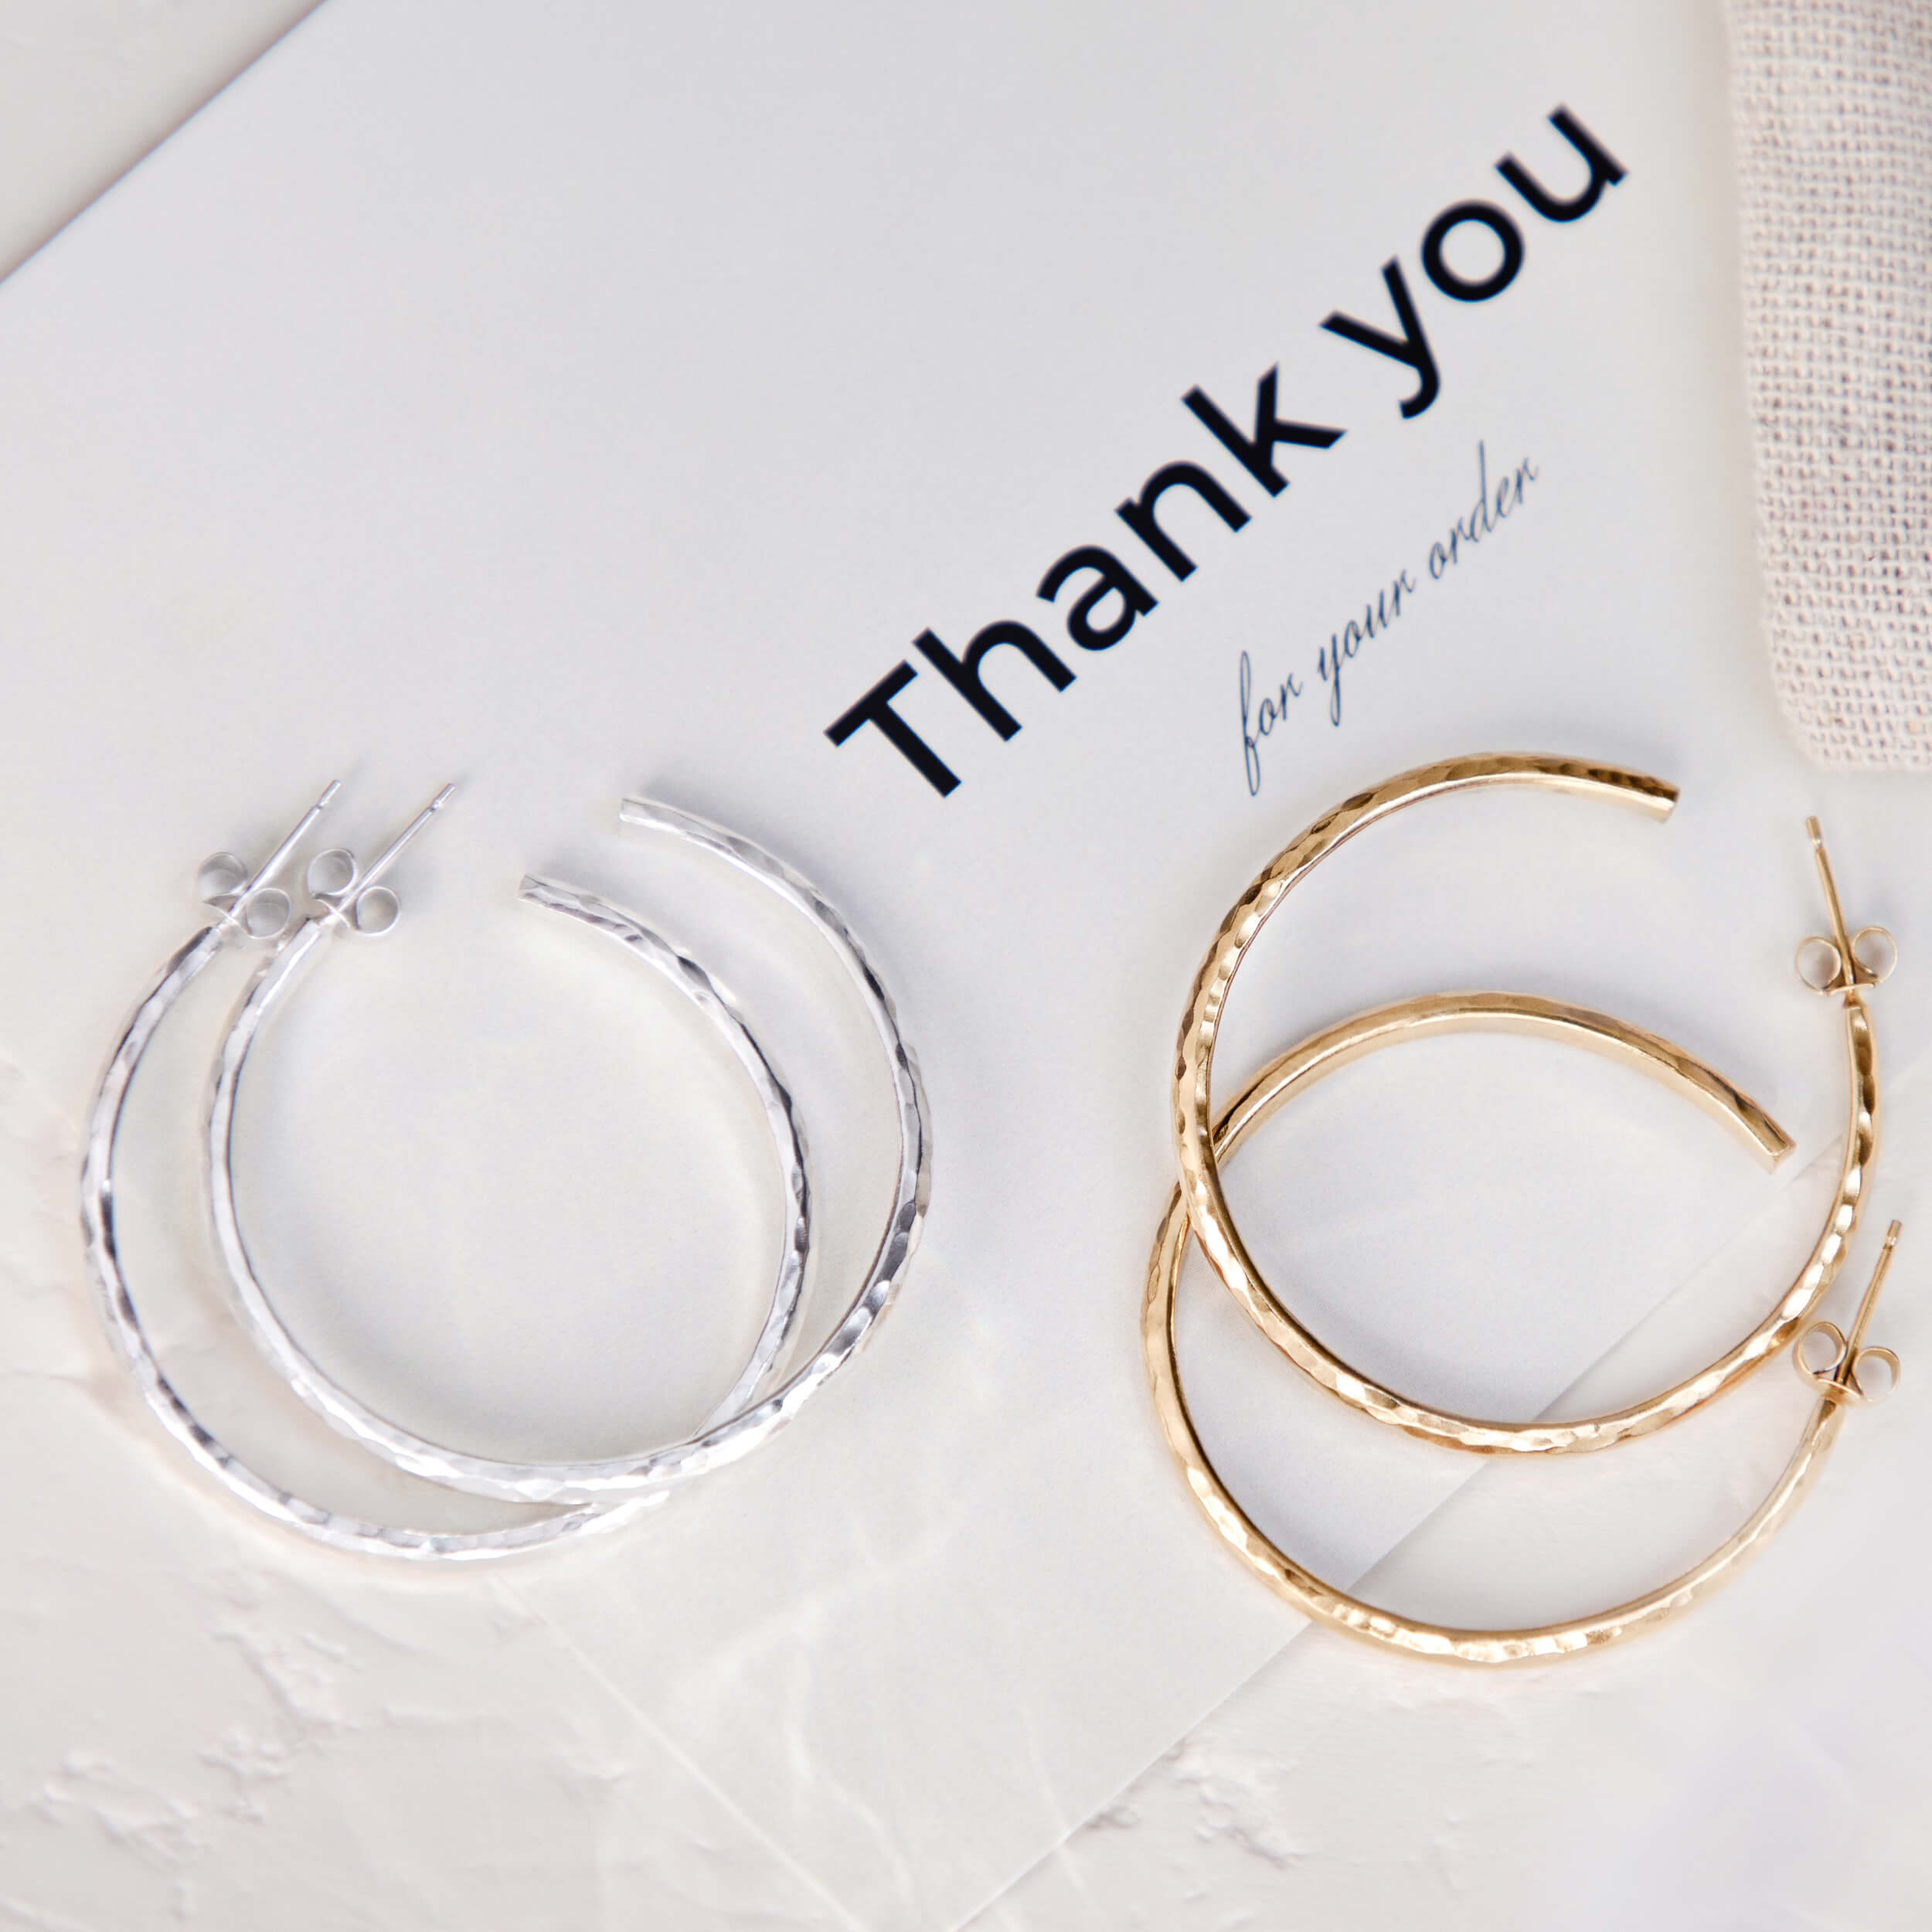 hammered silver hoops, large silver hoops, large gold hoops, 4cm diamater hoops